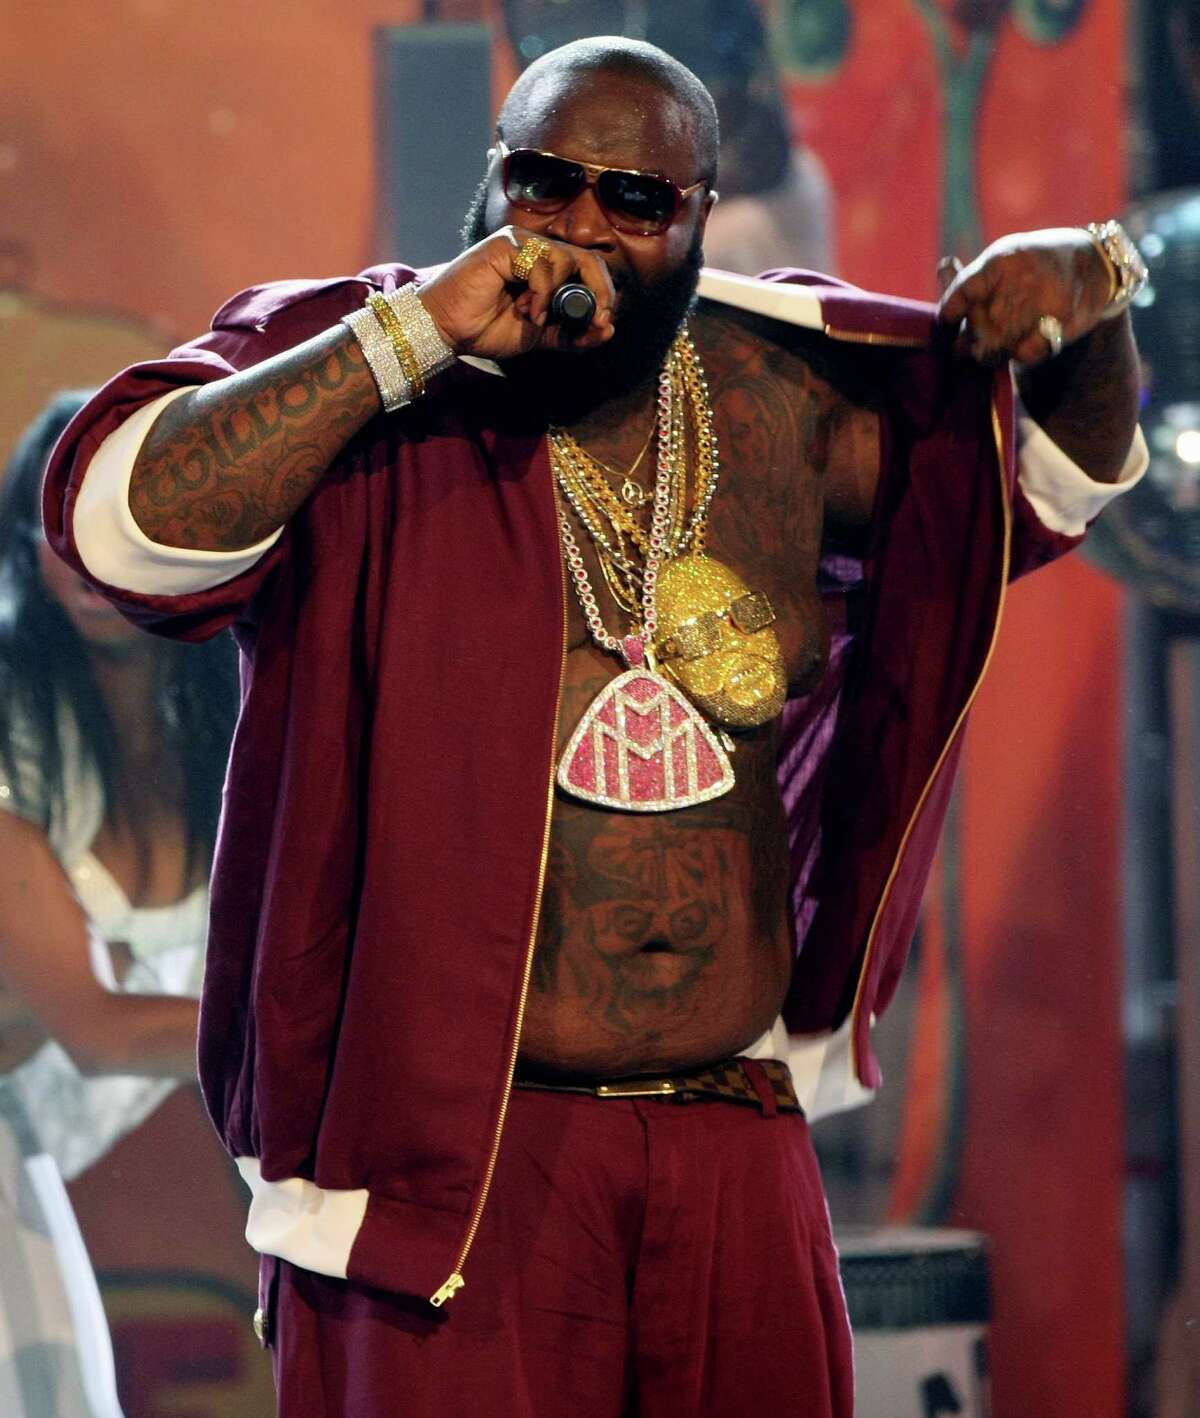 FILE-This June 24, 2008 file photo shows Rick Ross performing at the BET Awards in Los Angeles. Tamara Connor, an Atlanta-based stylist who's created looks for chart topping rappers like Lil Wayne, says artists are saving money by doing photo shoots with fewer of the pricey, specialized medallions considered a calling card among popular rap celebrities like Ross. (AP Photo/Hector Mata,File)